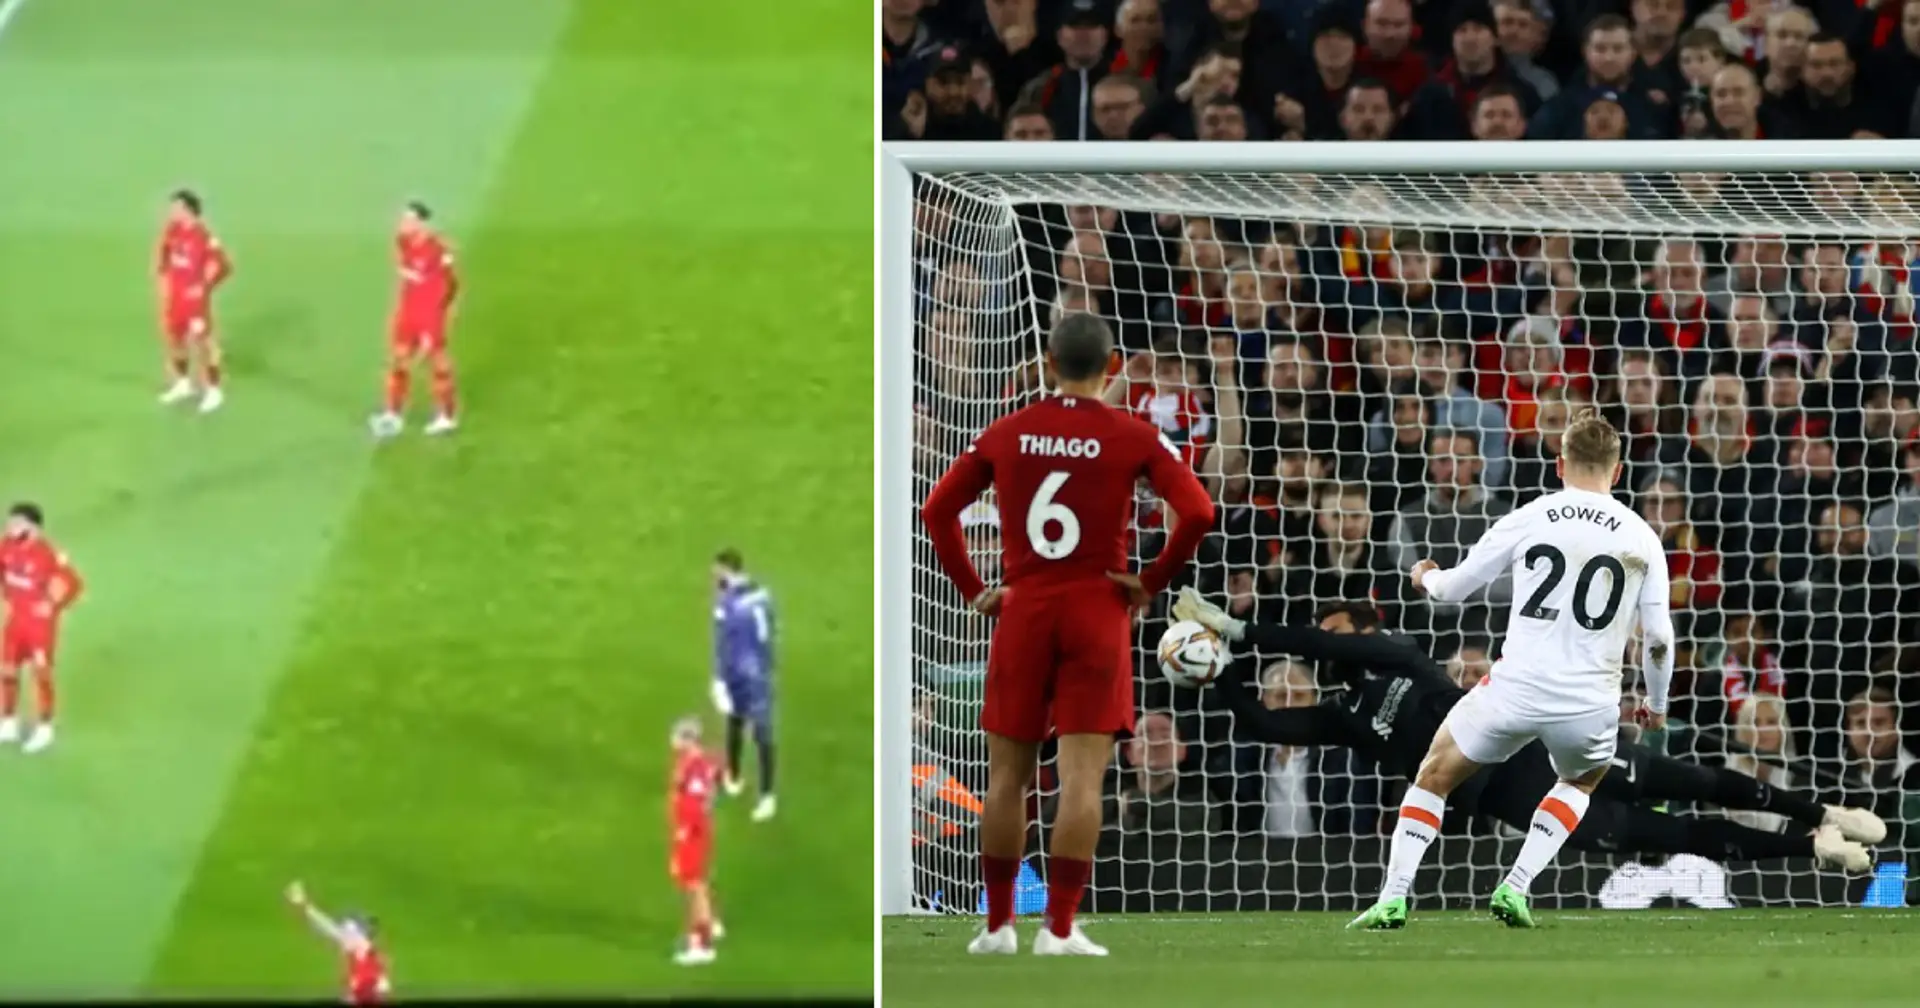 Spotted: what Van Dijk did at penalty spot before Alisson's save on Bowen